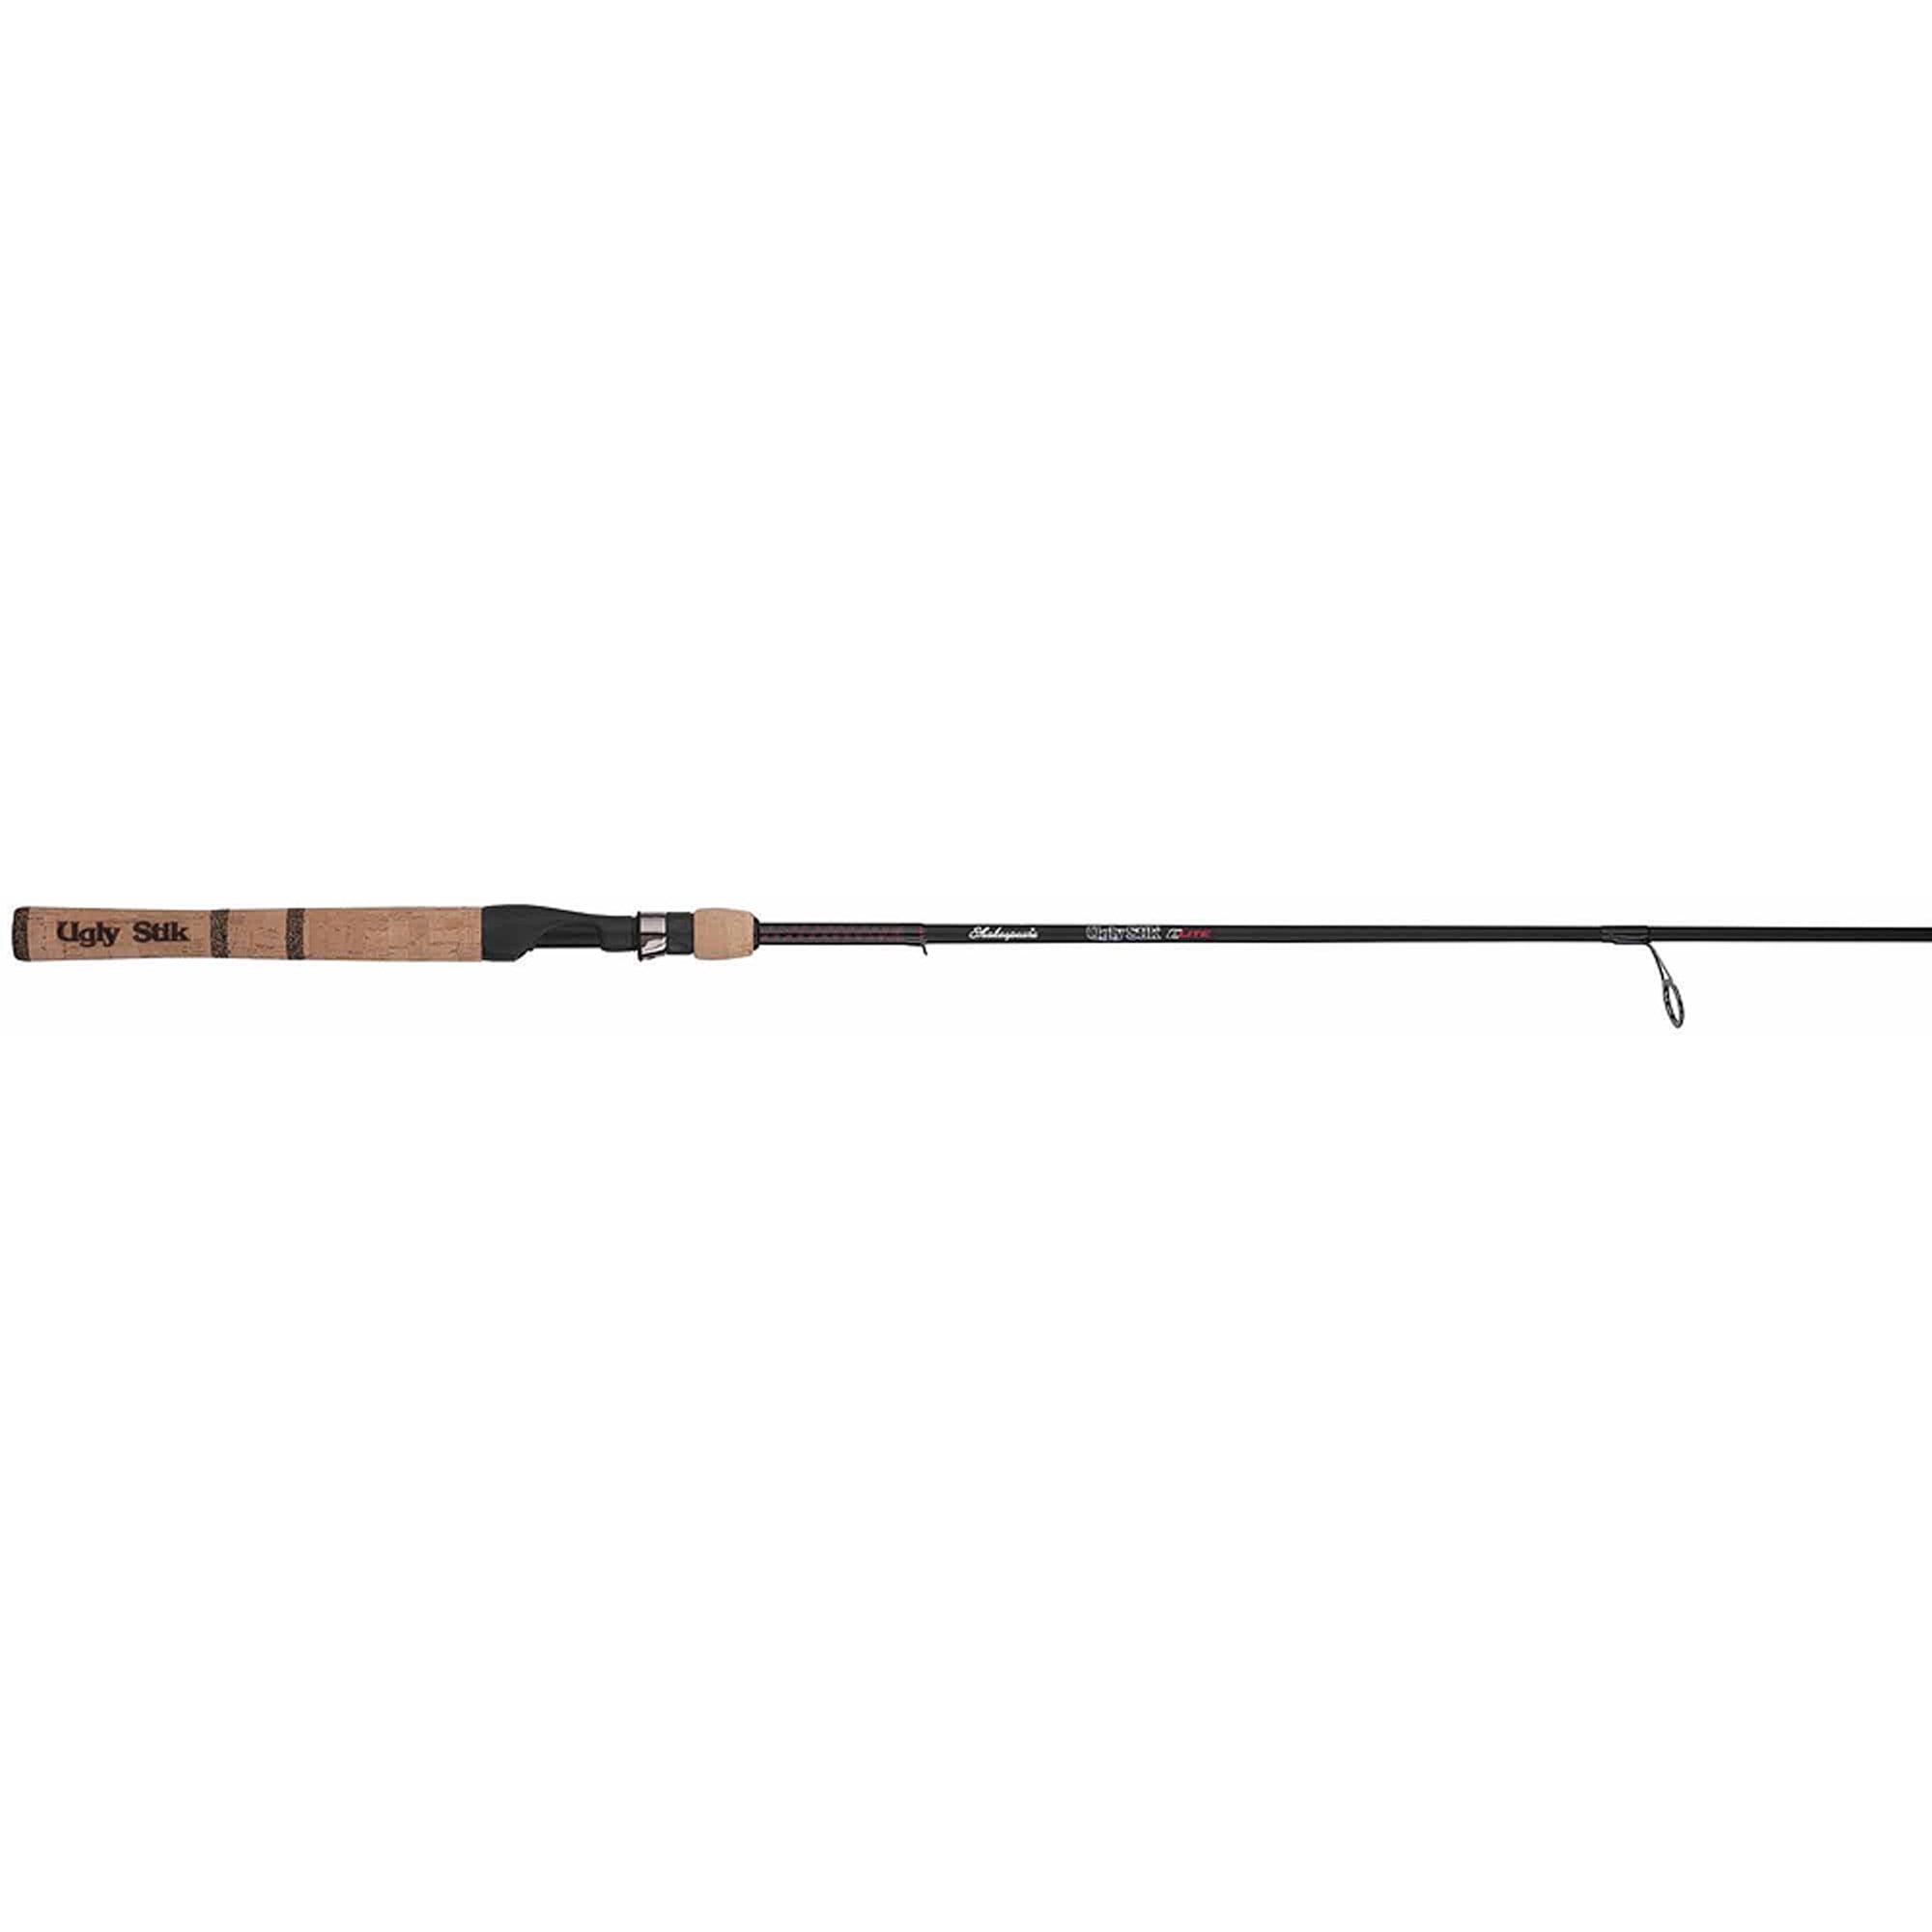 NEW SHAKESPEARE UGLY STICK GX2 6 FT 2 PC MED ACT SPIN ROD A 